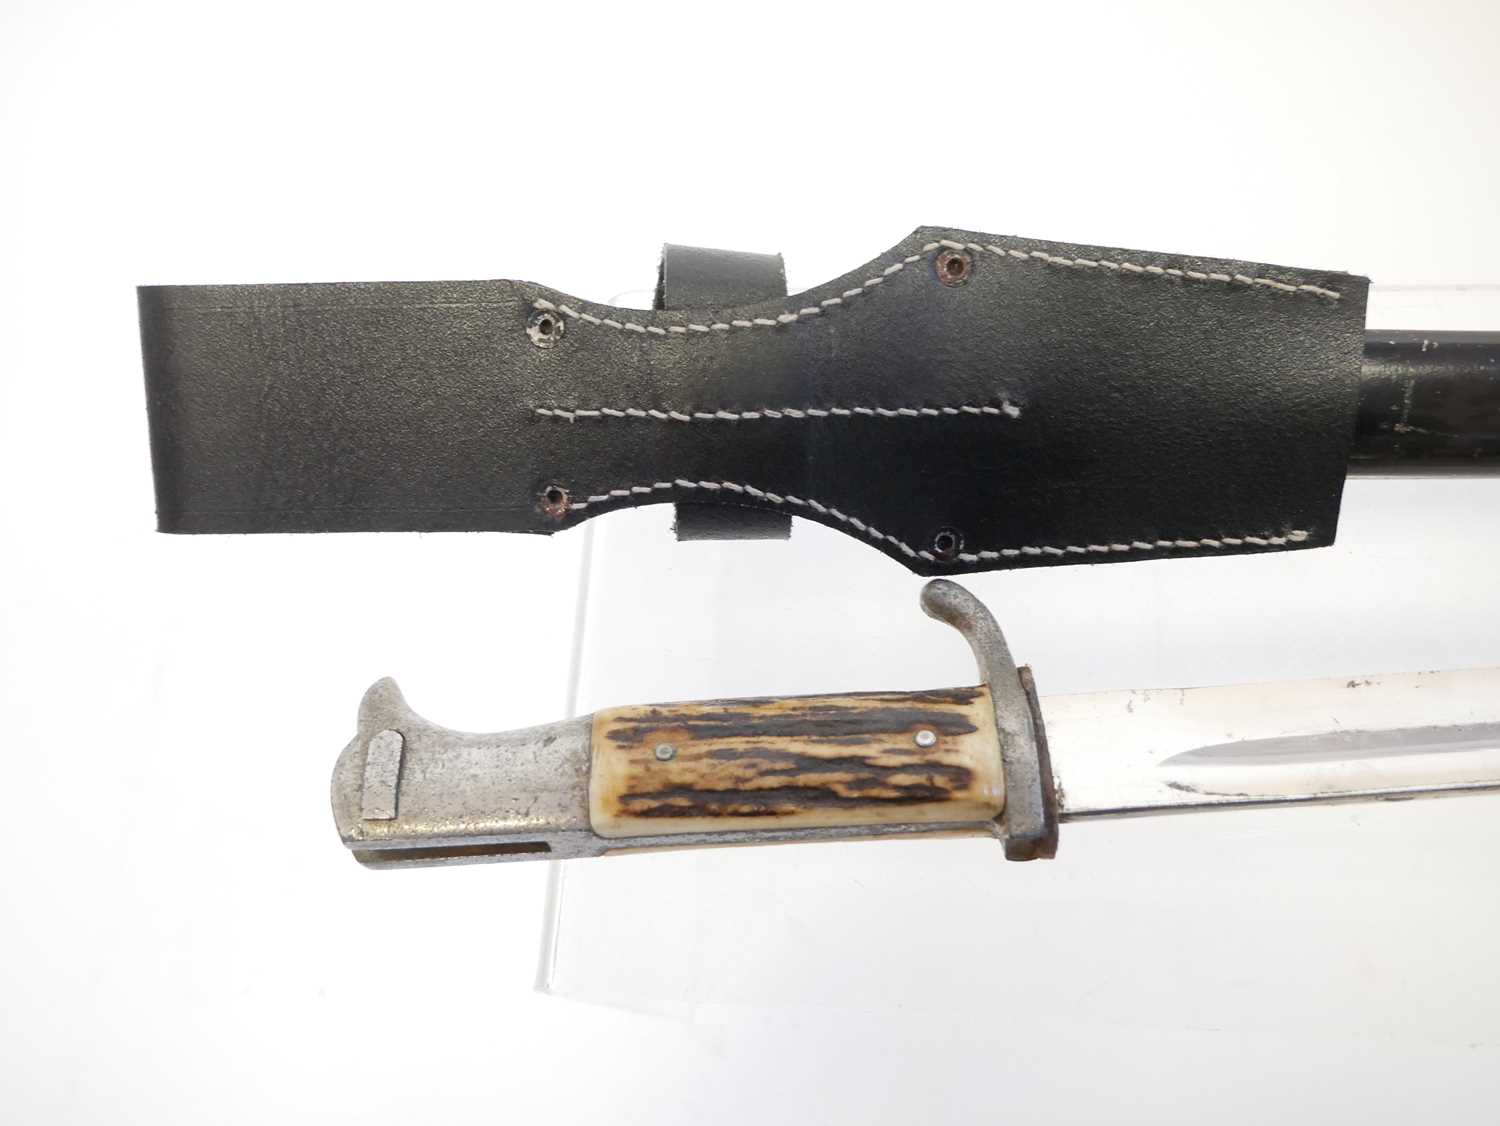 German Third Reich parade bayonet and scabbard, with staghorn grip, he ricasso with makers mark of a - Image 8 of 13